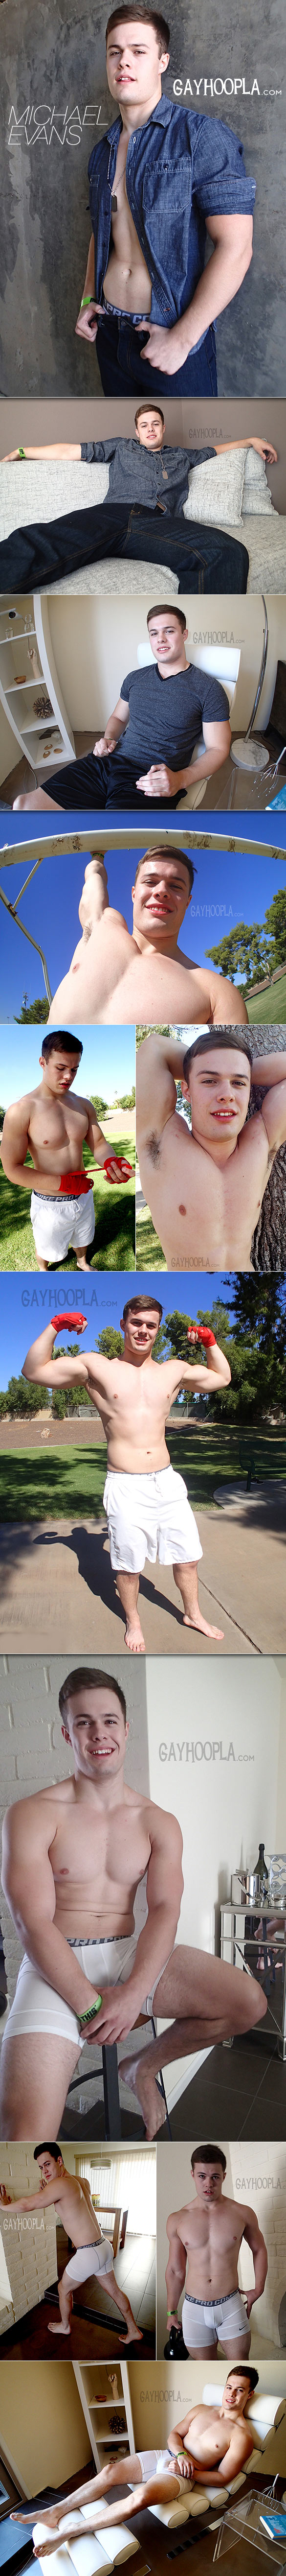 GayHoopla: Michael Evans rubs one out